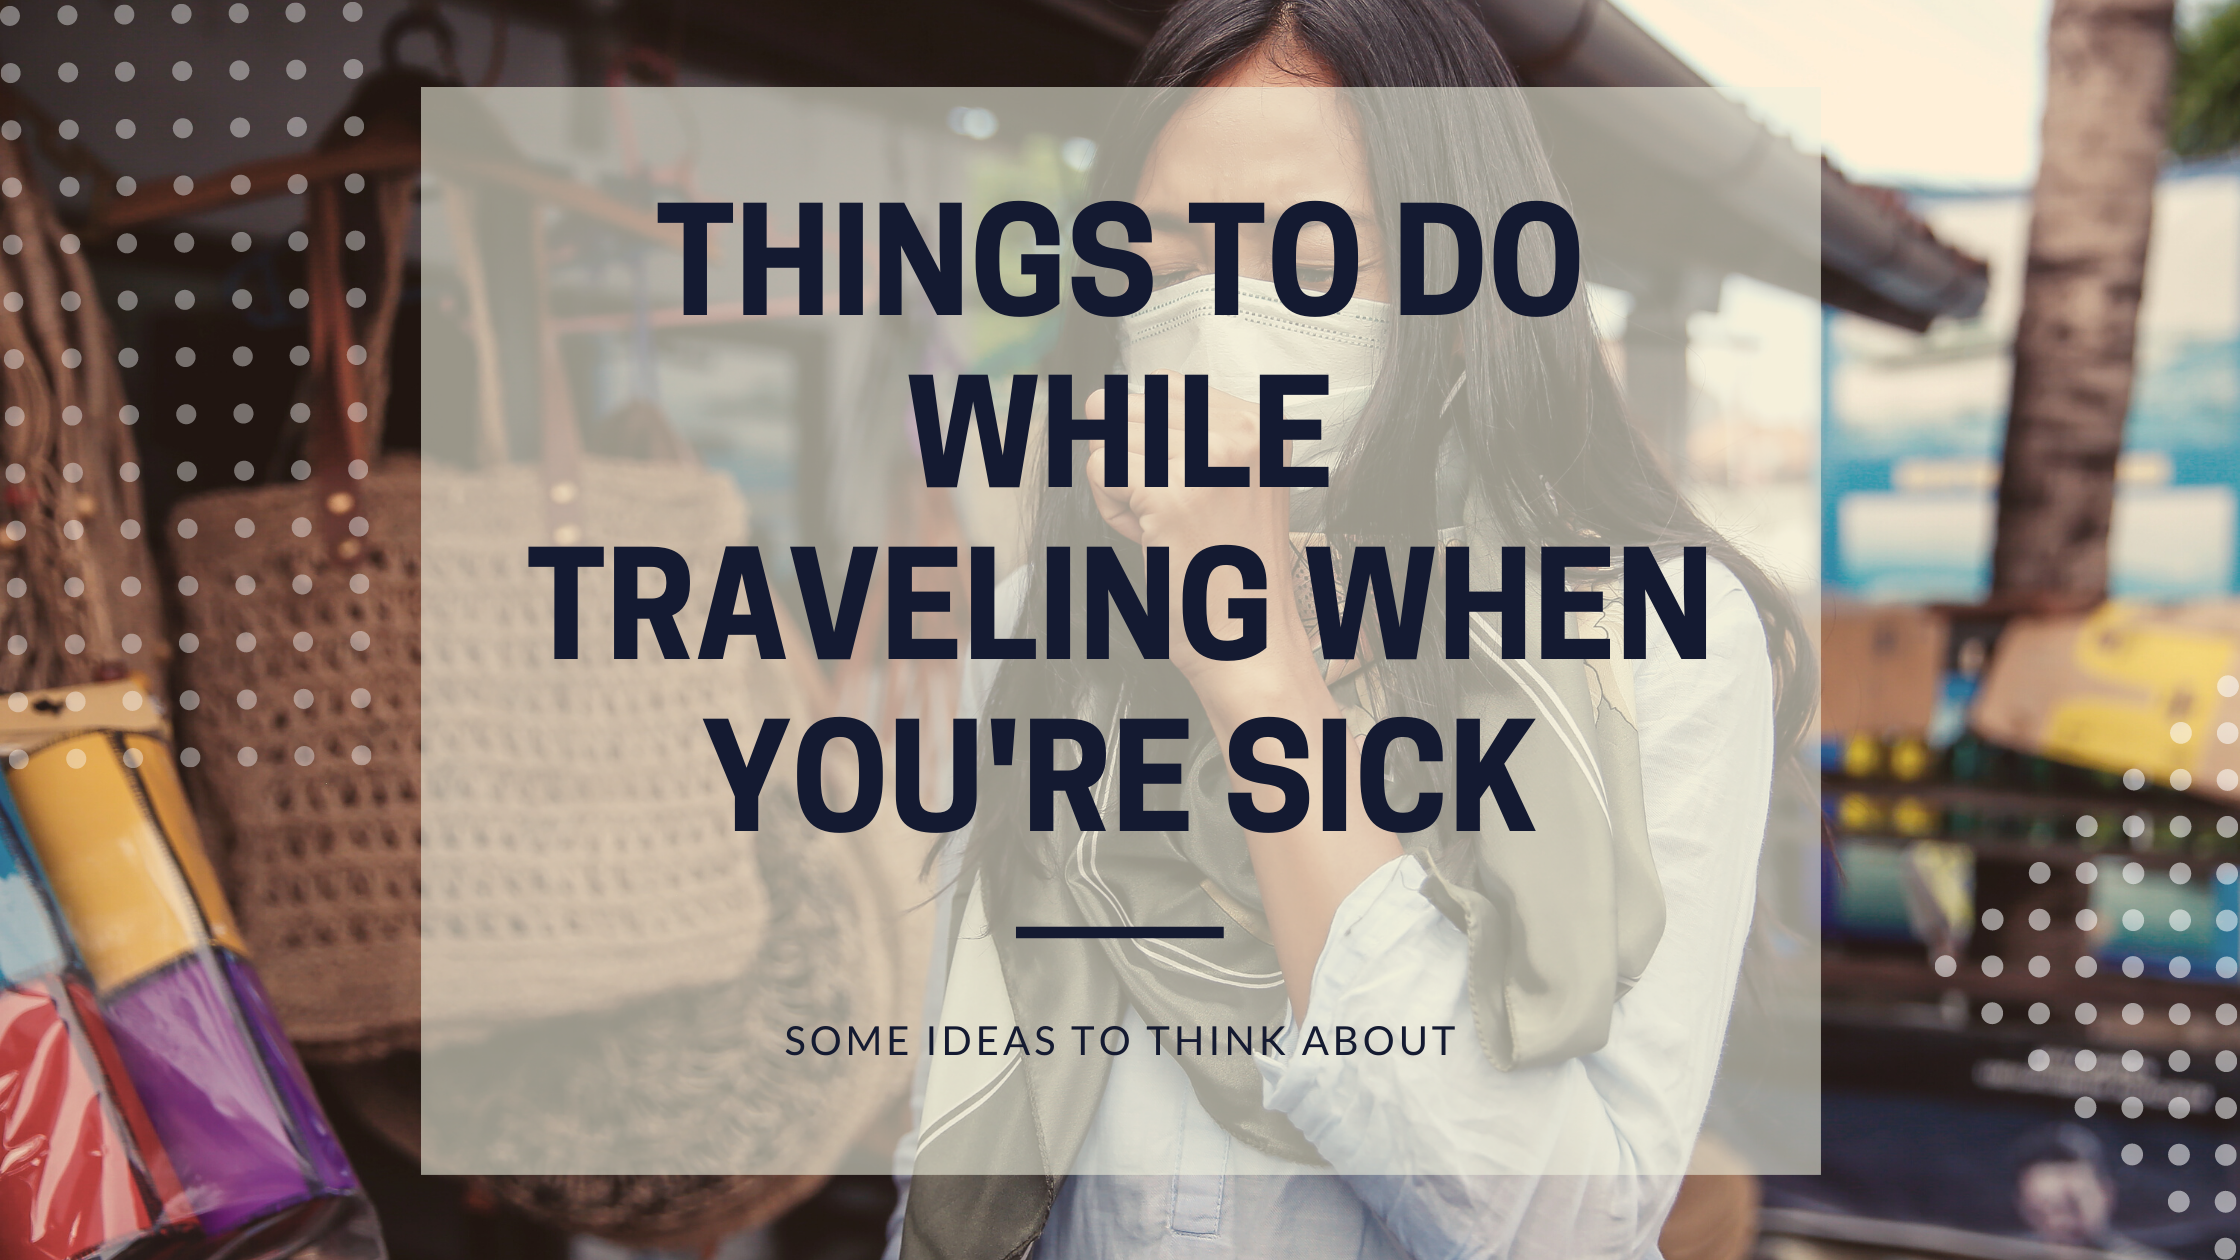 Things to do while traveling when you're sick